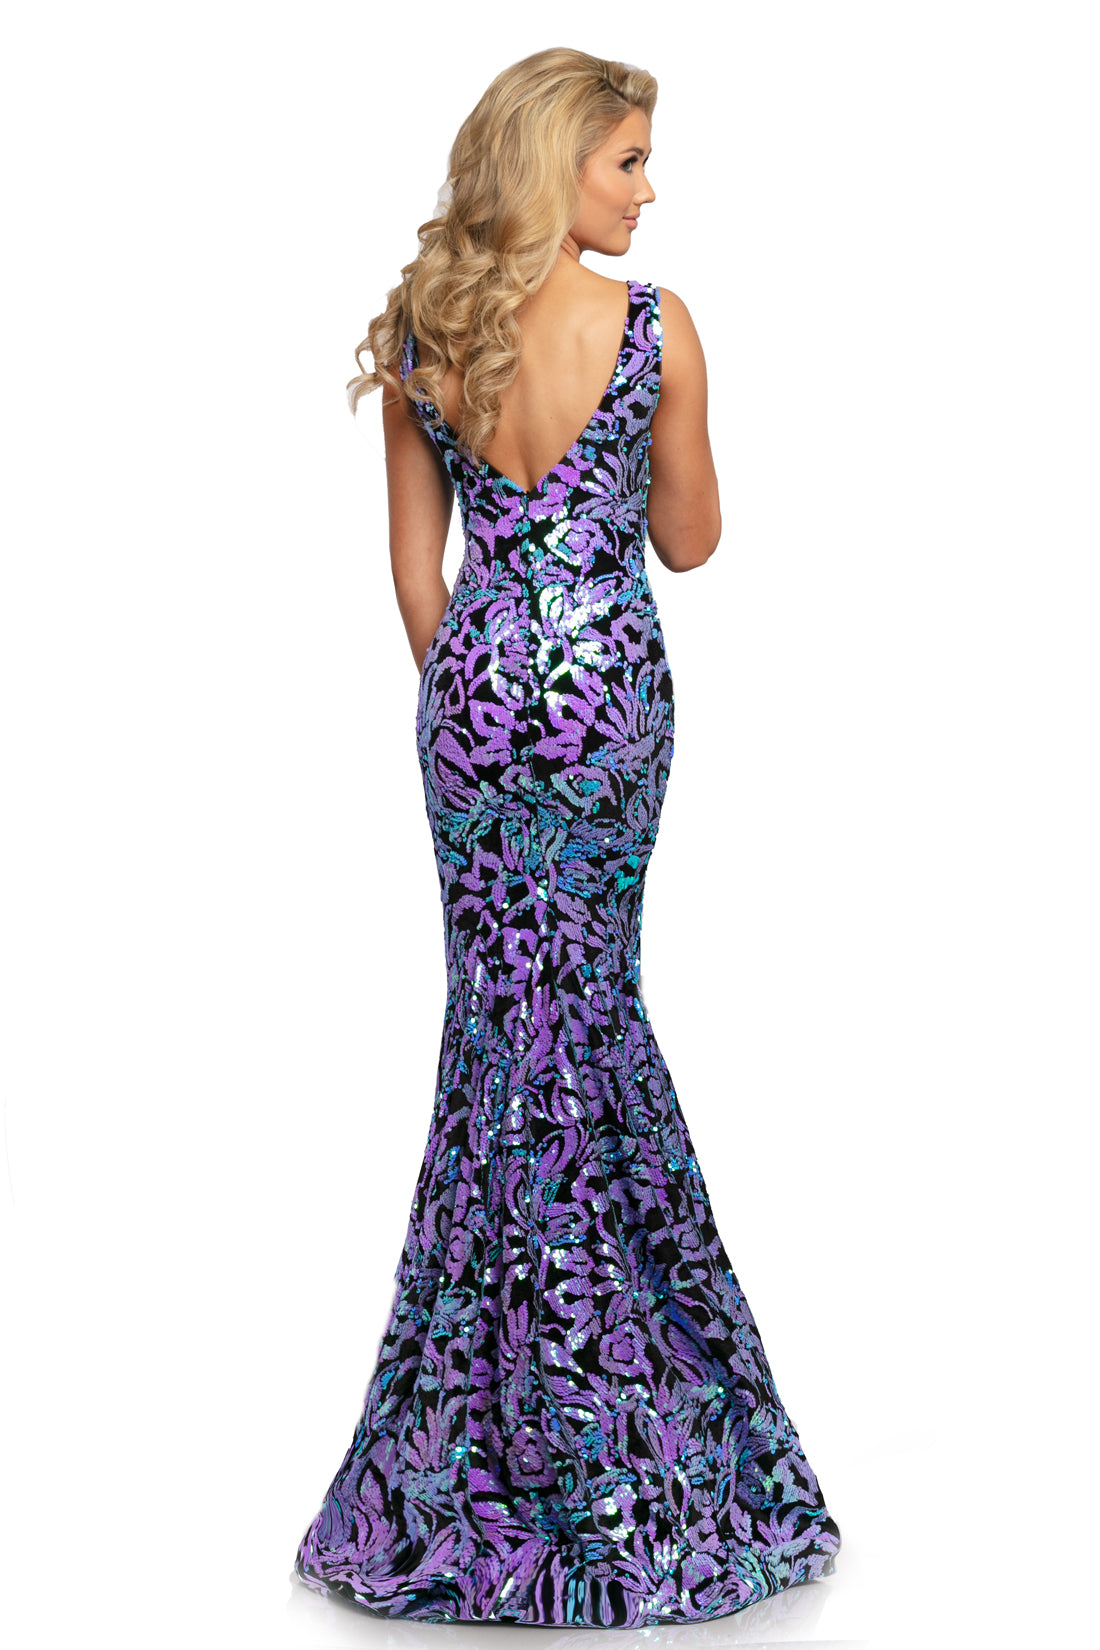 Johnathan Kayne 2106 is a velvet and sequins Prom Dress, Pageant Gown & Formal Evening Wear!  This Long Fitted Mermaid Dress Features a Stretch Velvet with Floral Iridescent  Sequin Embellishments along the entire dress. Deep V Neckline. with open V Back. Fit & Flare Silhouette with a Lush Trumpet Skirt. This Gown is Stunning!